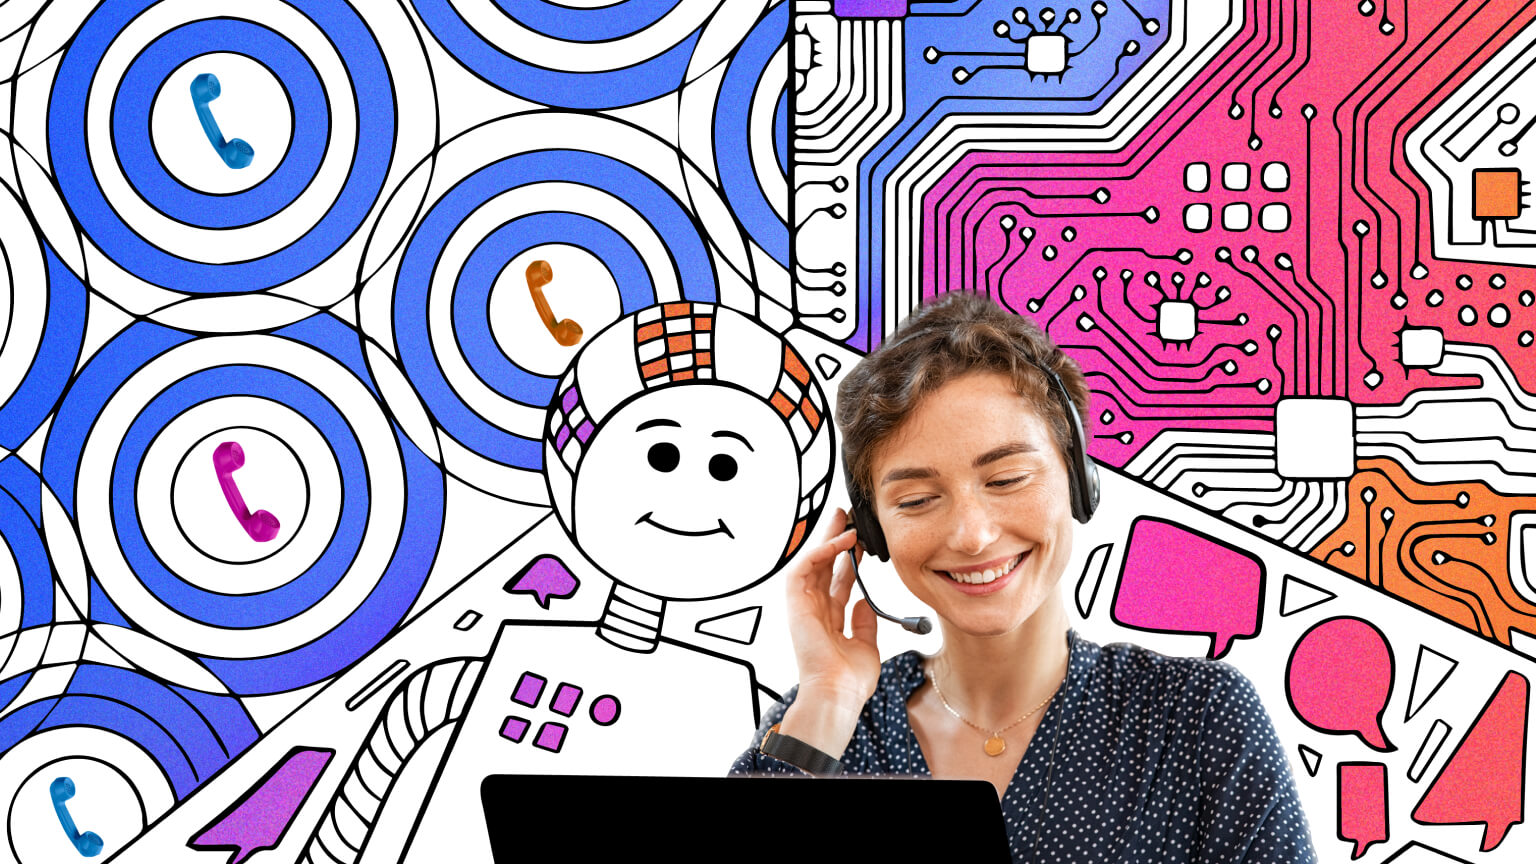 Illustrated Conversational AI chatbot helping customer service leaders respond with natural language understanding